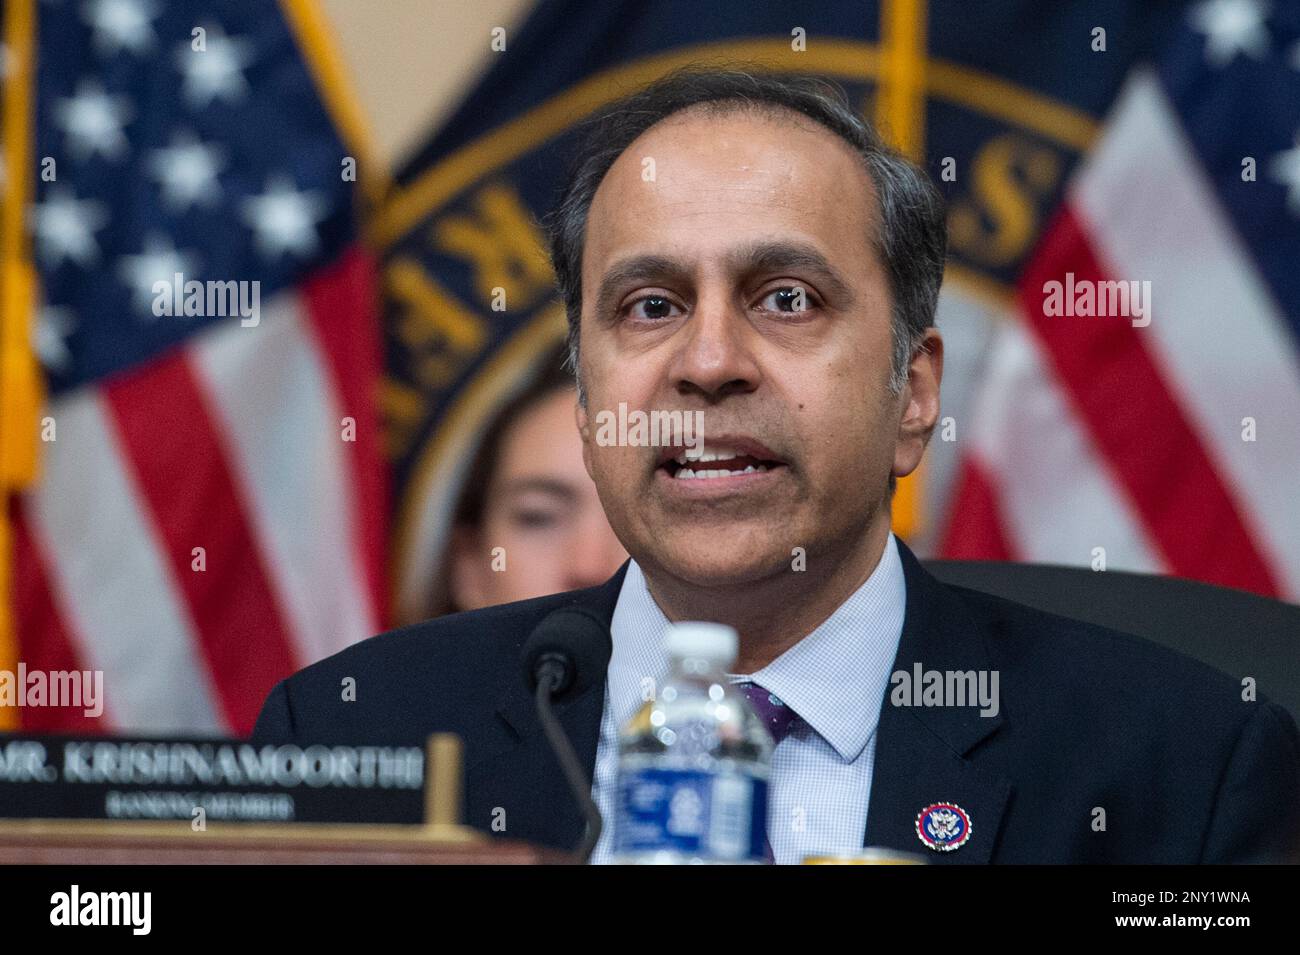 House Select Committee on the Strategic Competition between the United States and the Chinese Communist Party Ranking Member Subramanian Raja Krishnamoorthi (Demokrat von New Jersey) Befragt die Zeugen während der Anhörung des US House Select Committee on the Strategic Competition between the United States and the Chinese Communist Party âThe Chinese Communist Partyâs Threat to Americaâ im Cannon House Office Building auf Capitol Hill in Washington, DC, Dienstag, 28. Februar 2023. Kredit: Rod Lamkey/CNP Stockfoto